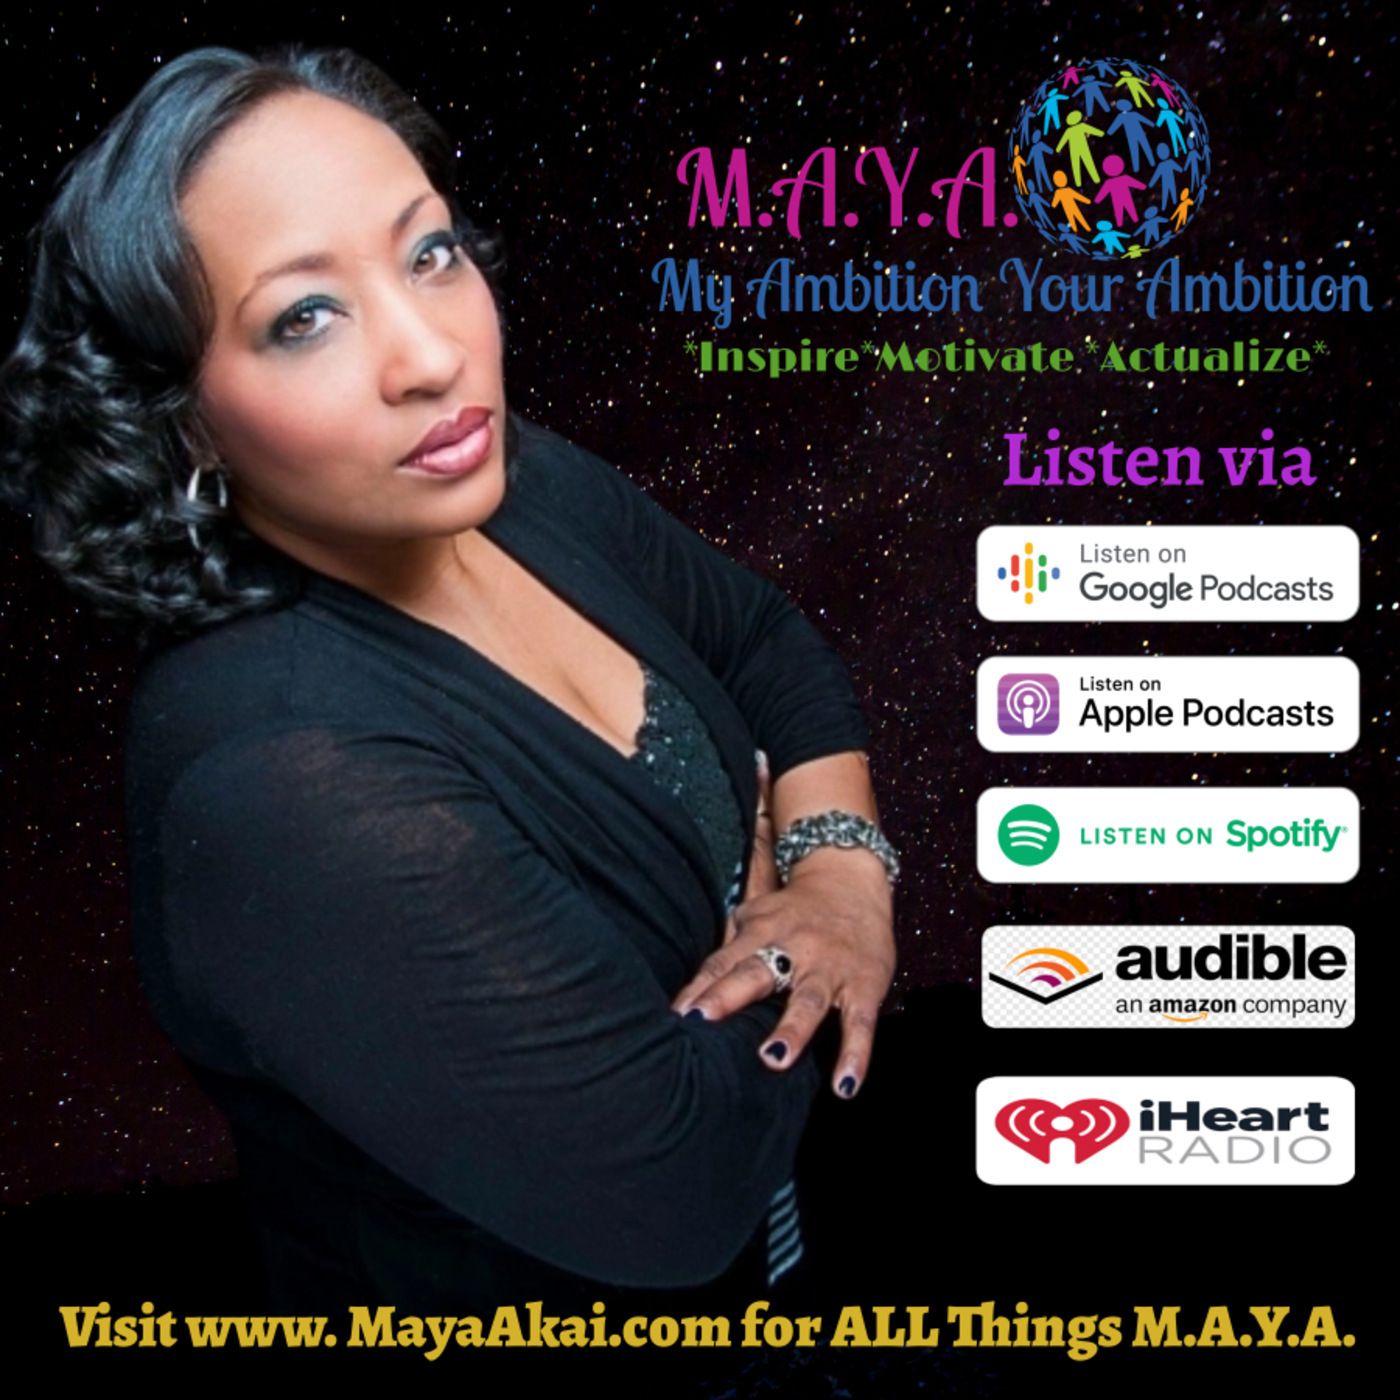 M.A.Y.A. Episode #60: The M.A.Y.A. Virtual Mail...The Last Delivery of the Year!!!